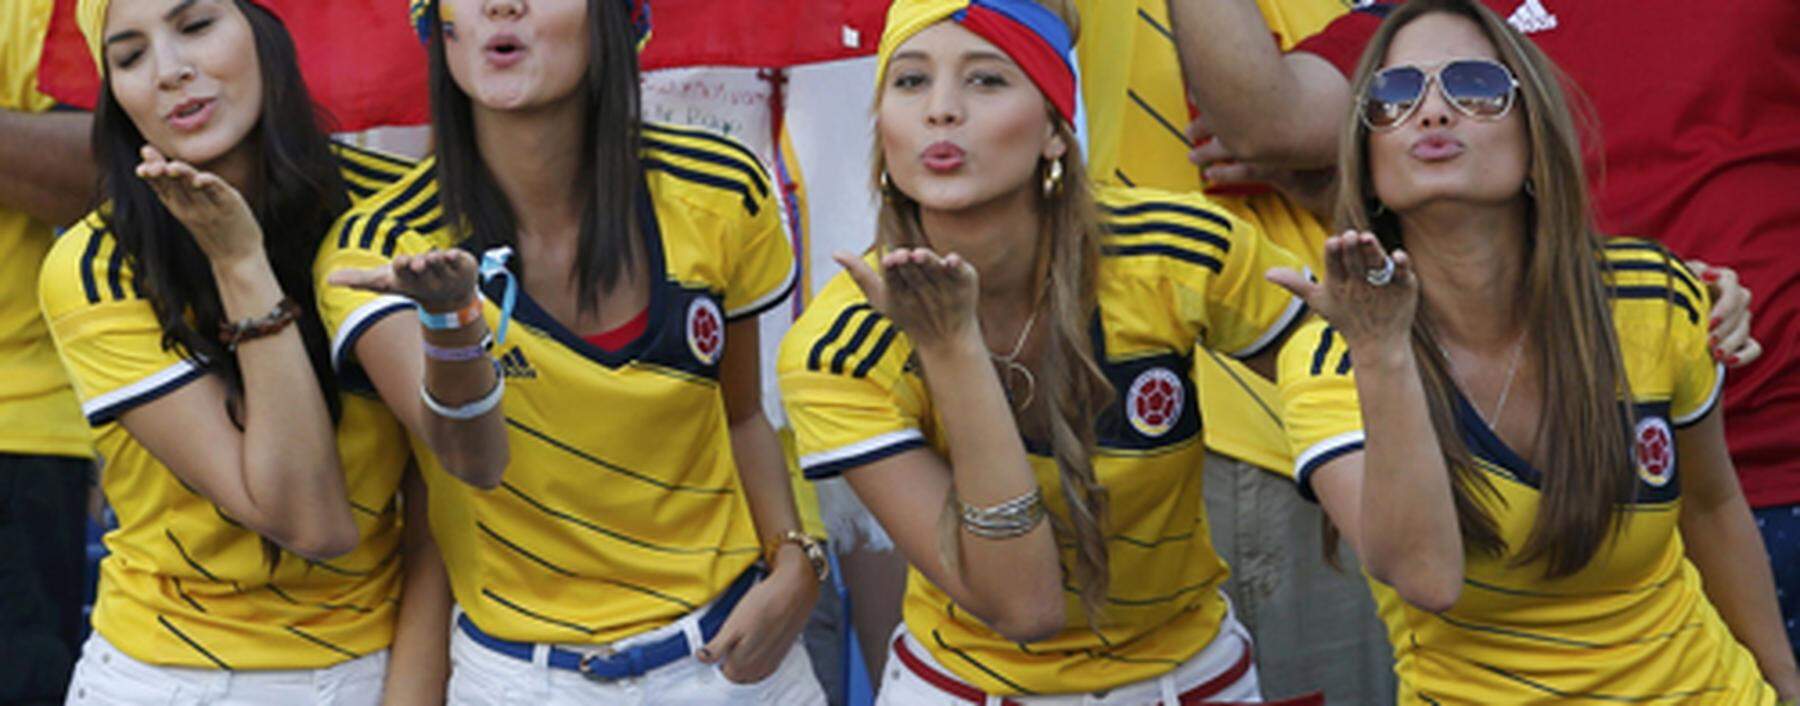 Colombia fans blow kisses before the 2014 World Cup Group C soccer match between Japan and Colombia at the Pantanal arena